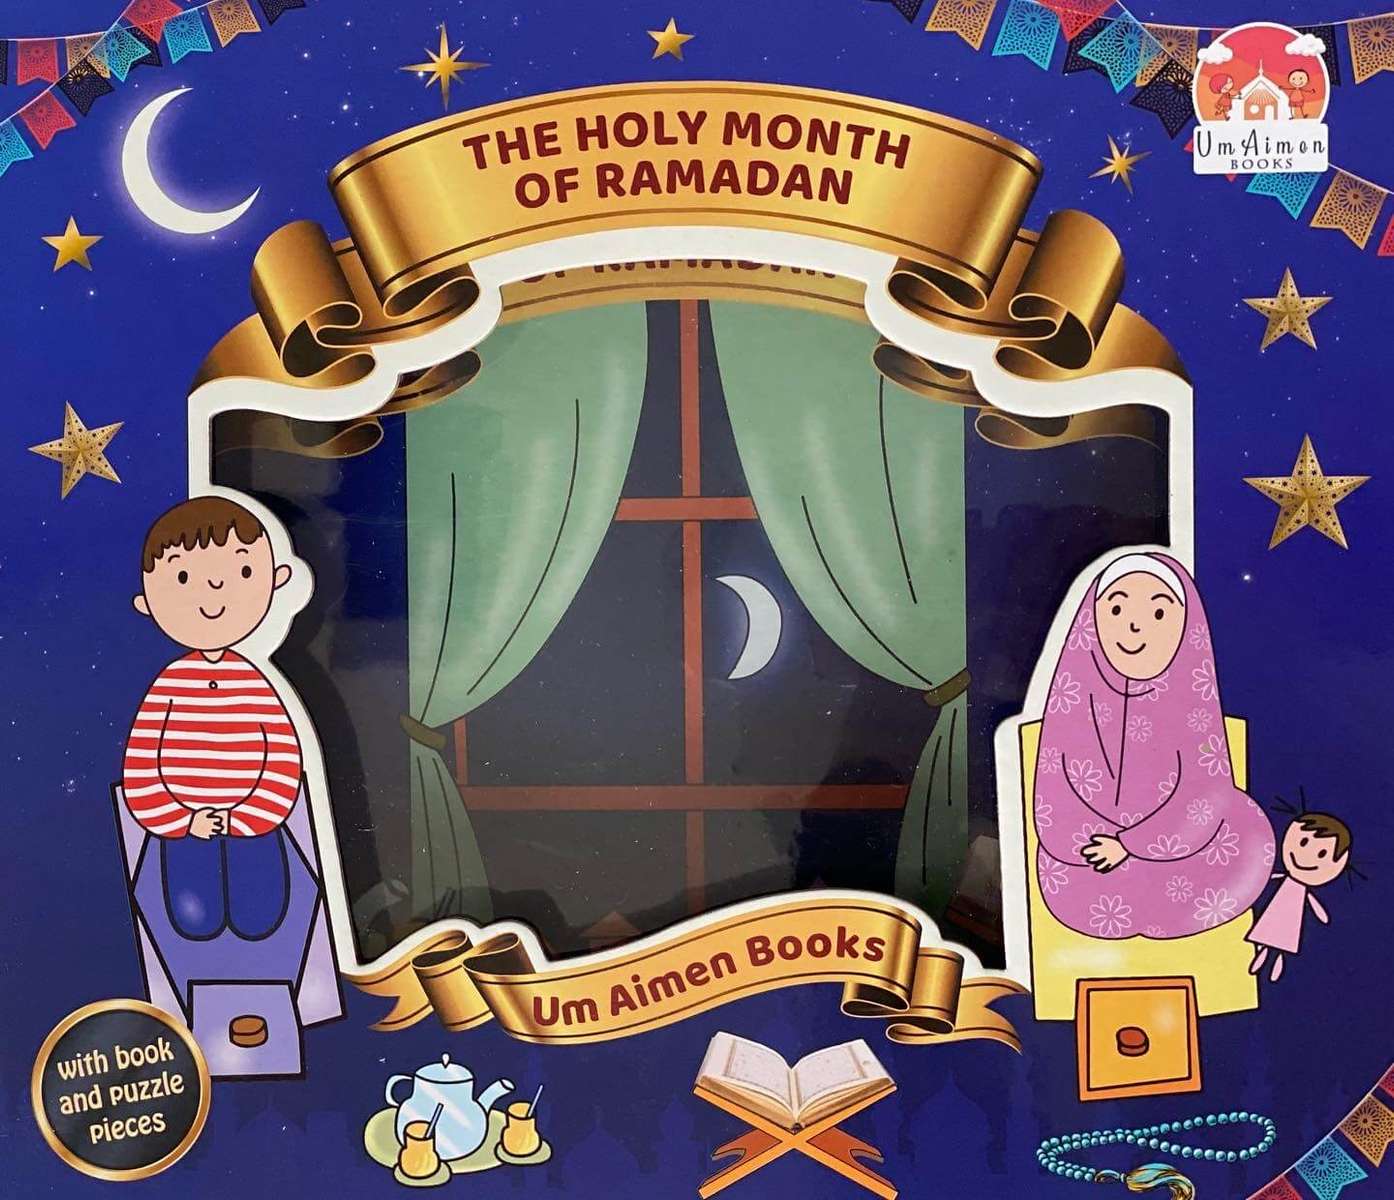 RamadanGame puzzle online from photo